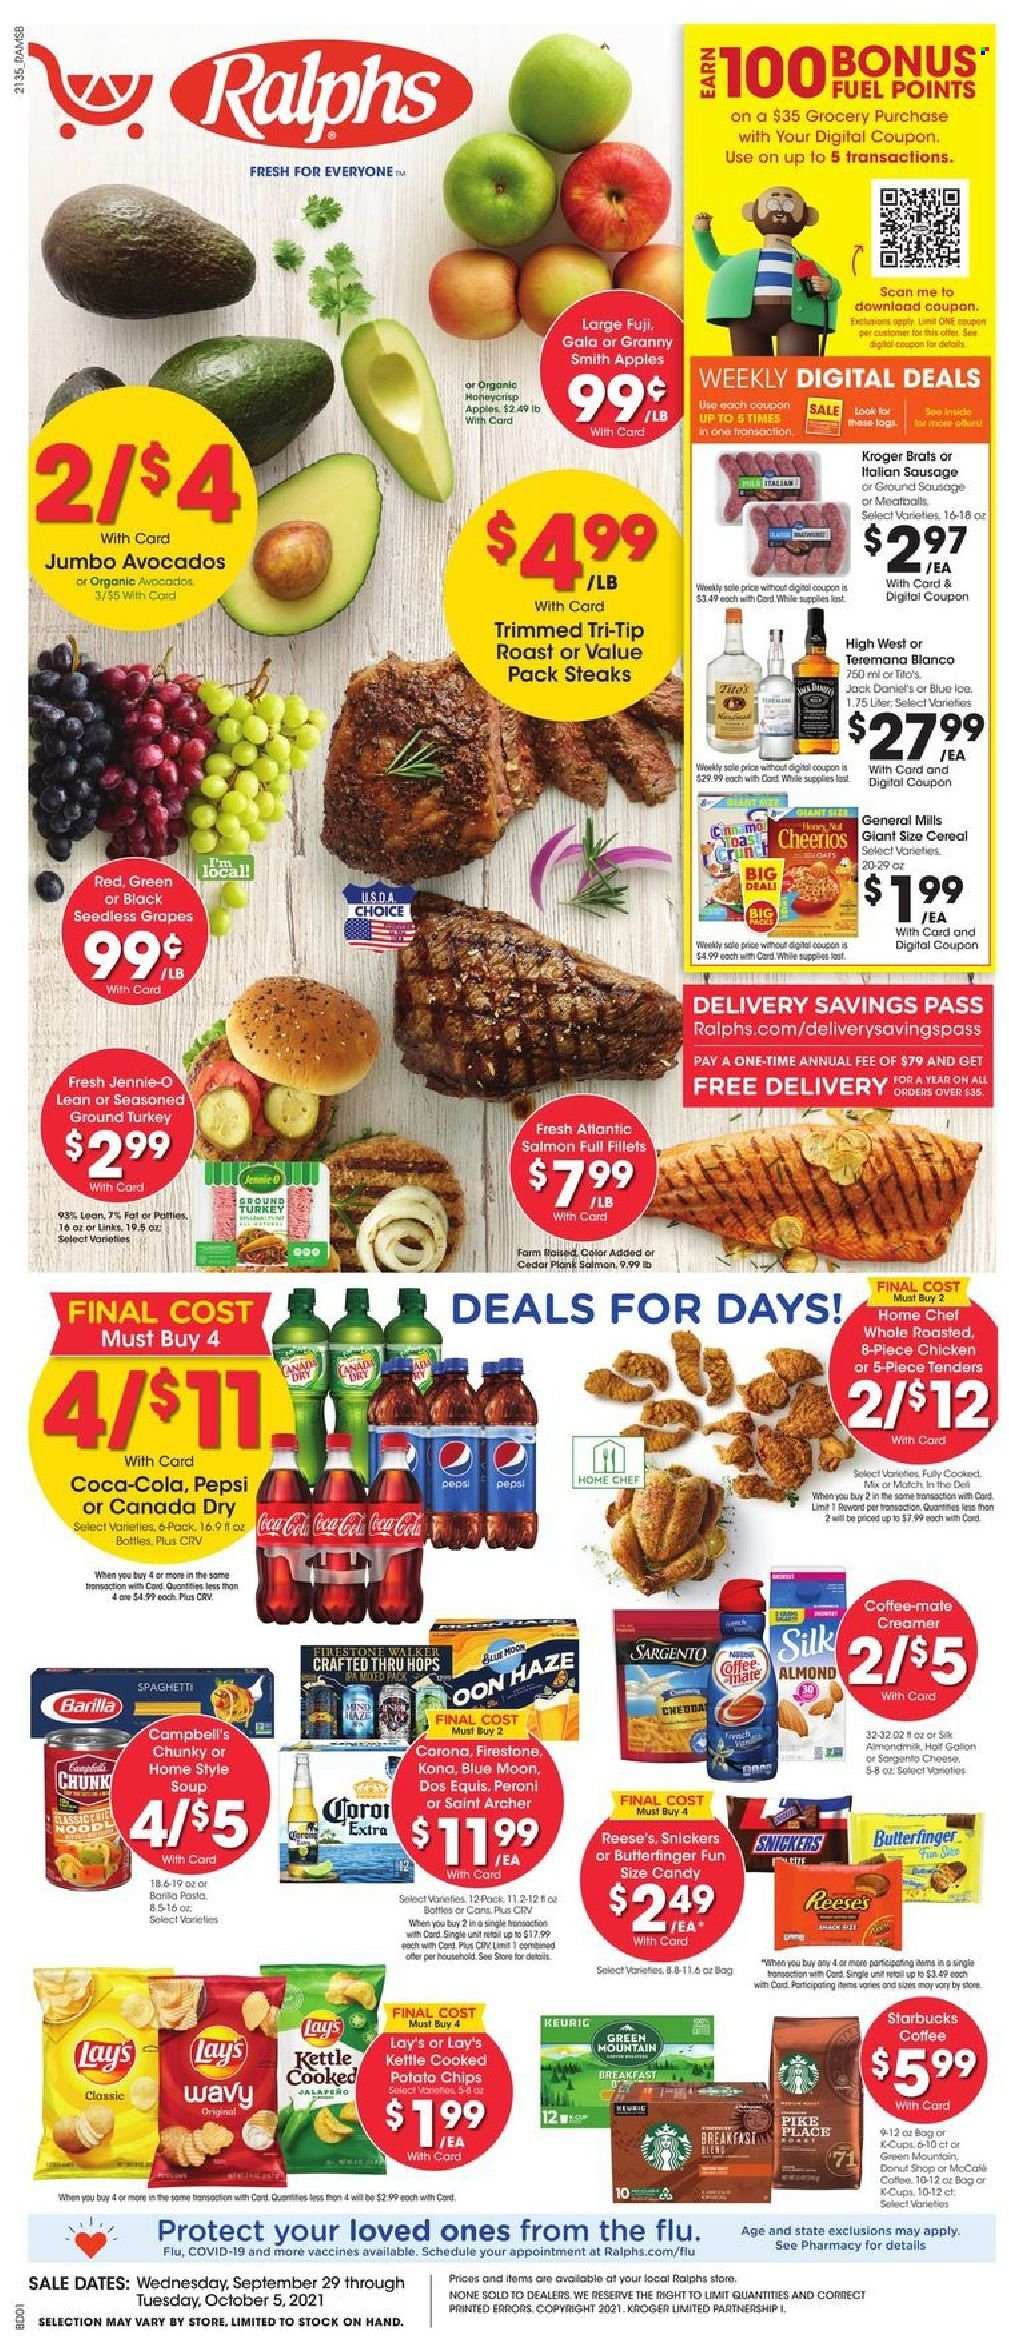 thumbnail - Ralphs Flyer - 09/29/2021 - 10/05/2021 - Sales products - seedless grapes, apples, avocado, Gala, grapes, Granny Smith, salmon, Campbell's, spaghetti, Jack Daniel's, meatballs, soup, Barilla, sausage, italian sausage, cheese, Sargento, Coffee-Mate, Silk, creamer, Reese's, Snickers, potato chips, chips, Lay’s, cereals, Cheerios, Canada Dry, Coca-Cola, Pepsi, Starbucks, Keurig, Green Mountain, beer, Corona Extra, Peroni, Firestone Walker, ground turkey, steak, Dos Equis, Blue Moon. Page 1.